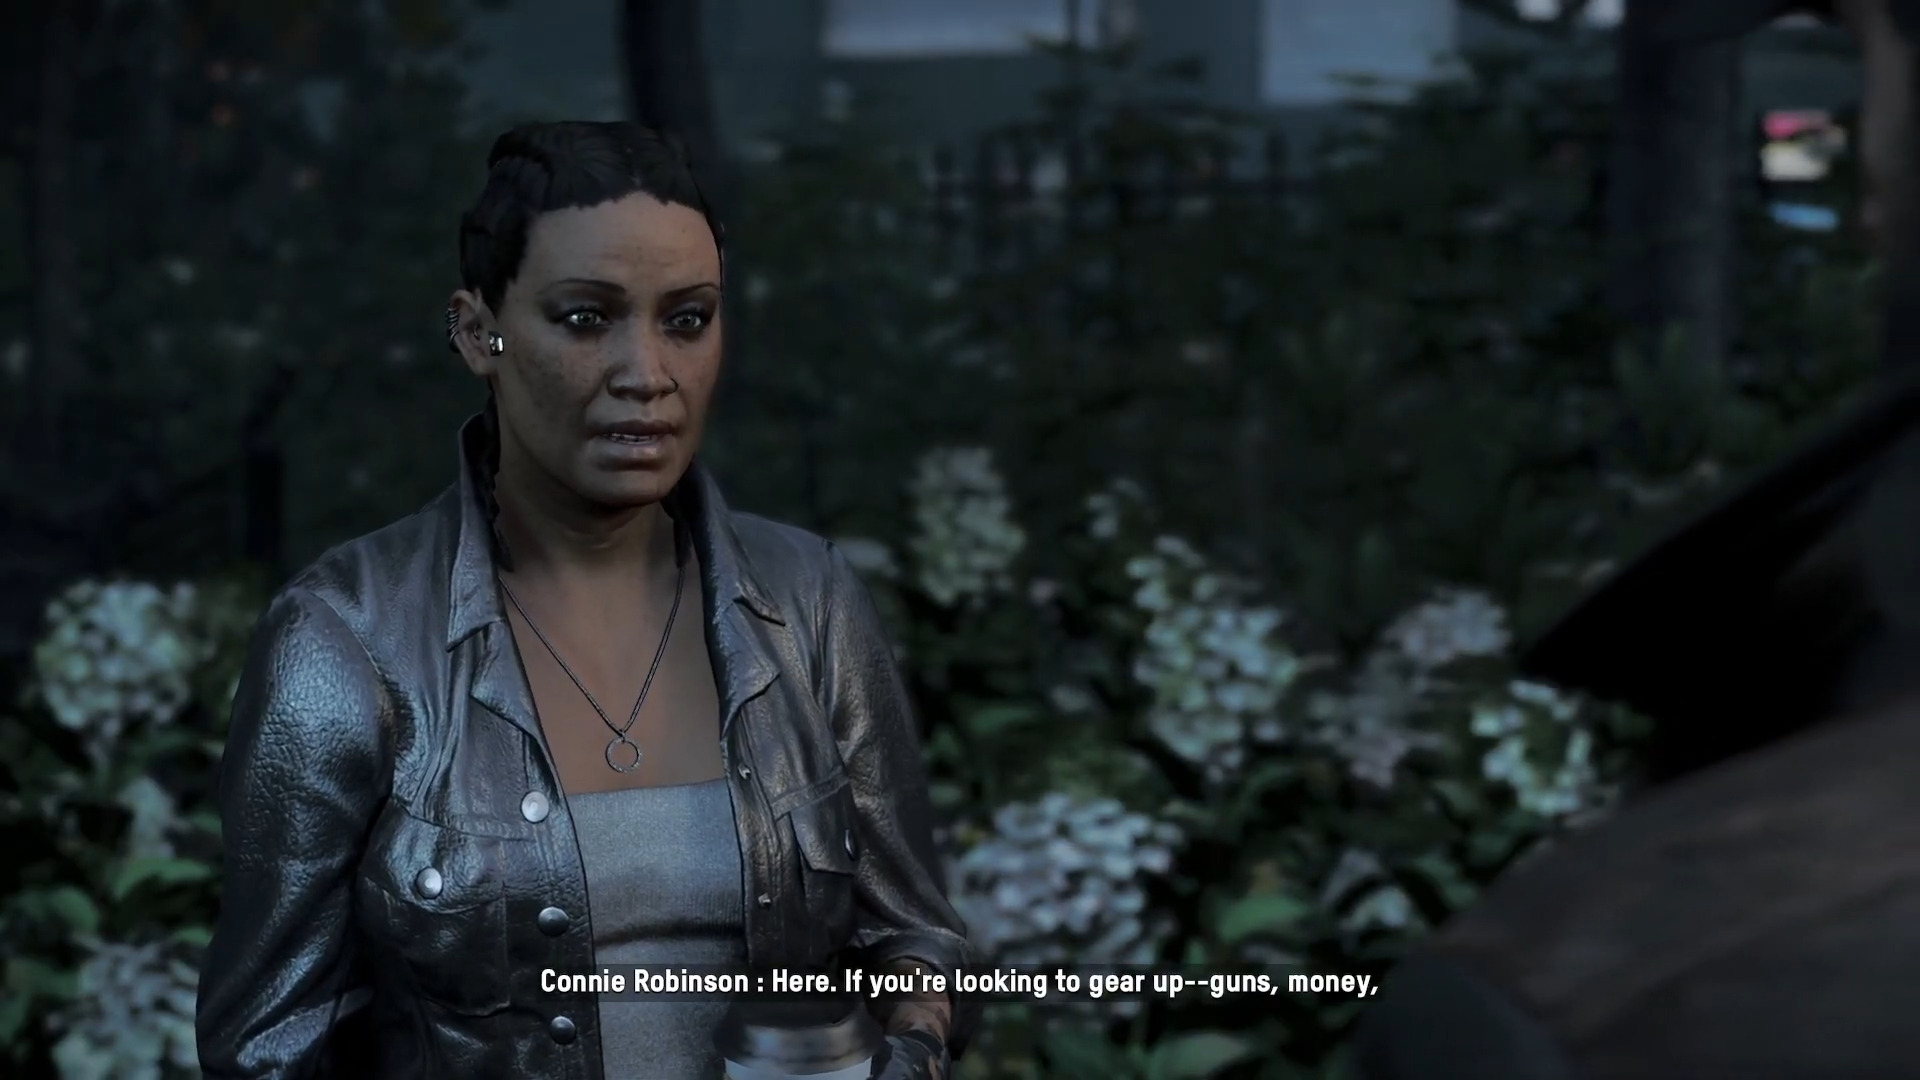 Connie Robinson (Cathy Young) offers her services to Aiden Pearce (Noam Jenkins) in Watch Dogs: Legion - Bloodline (2021), Ubisoft